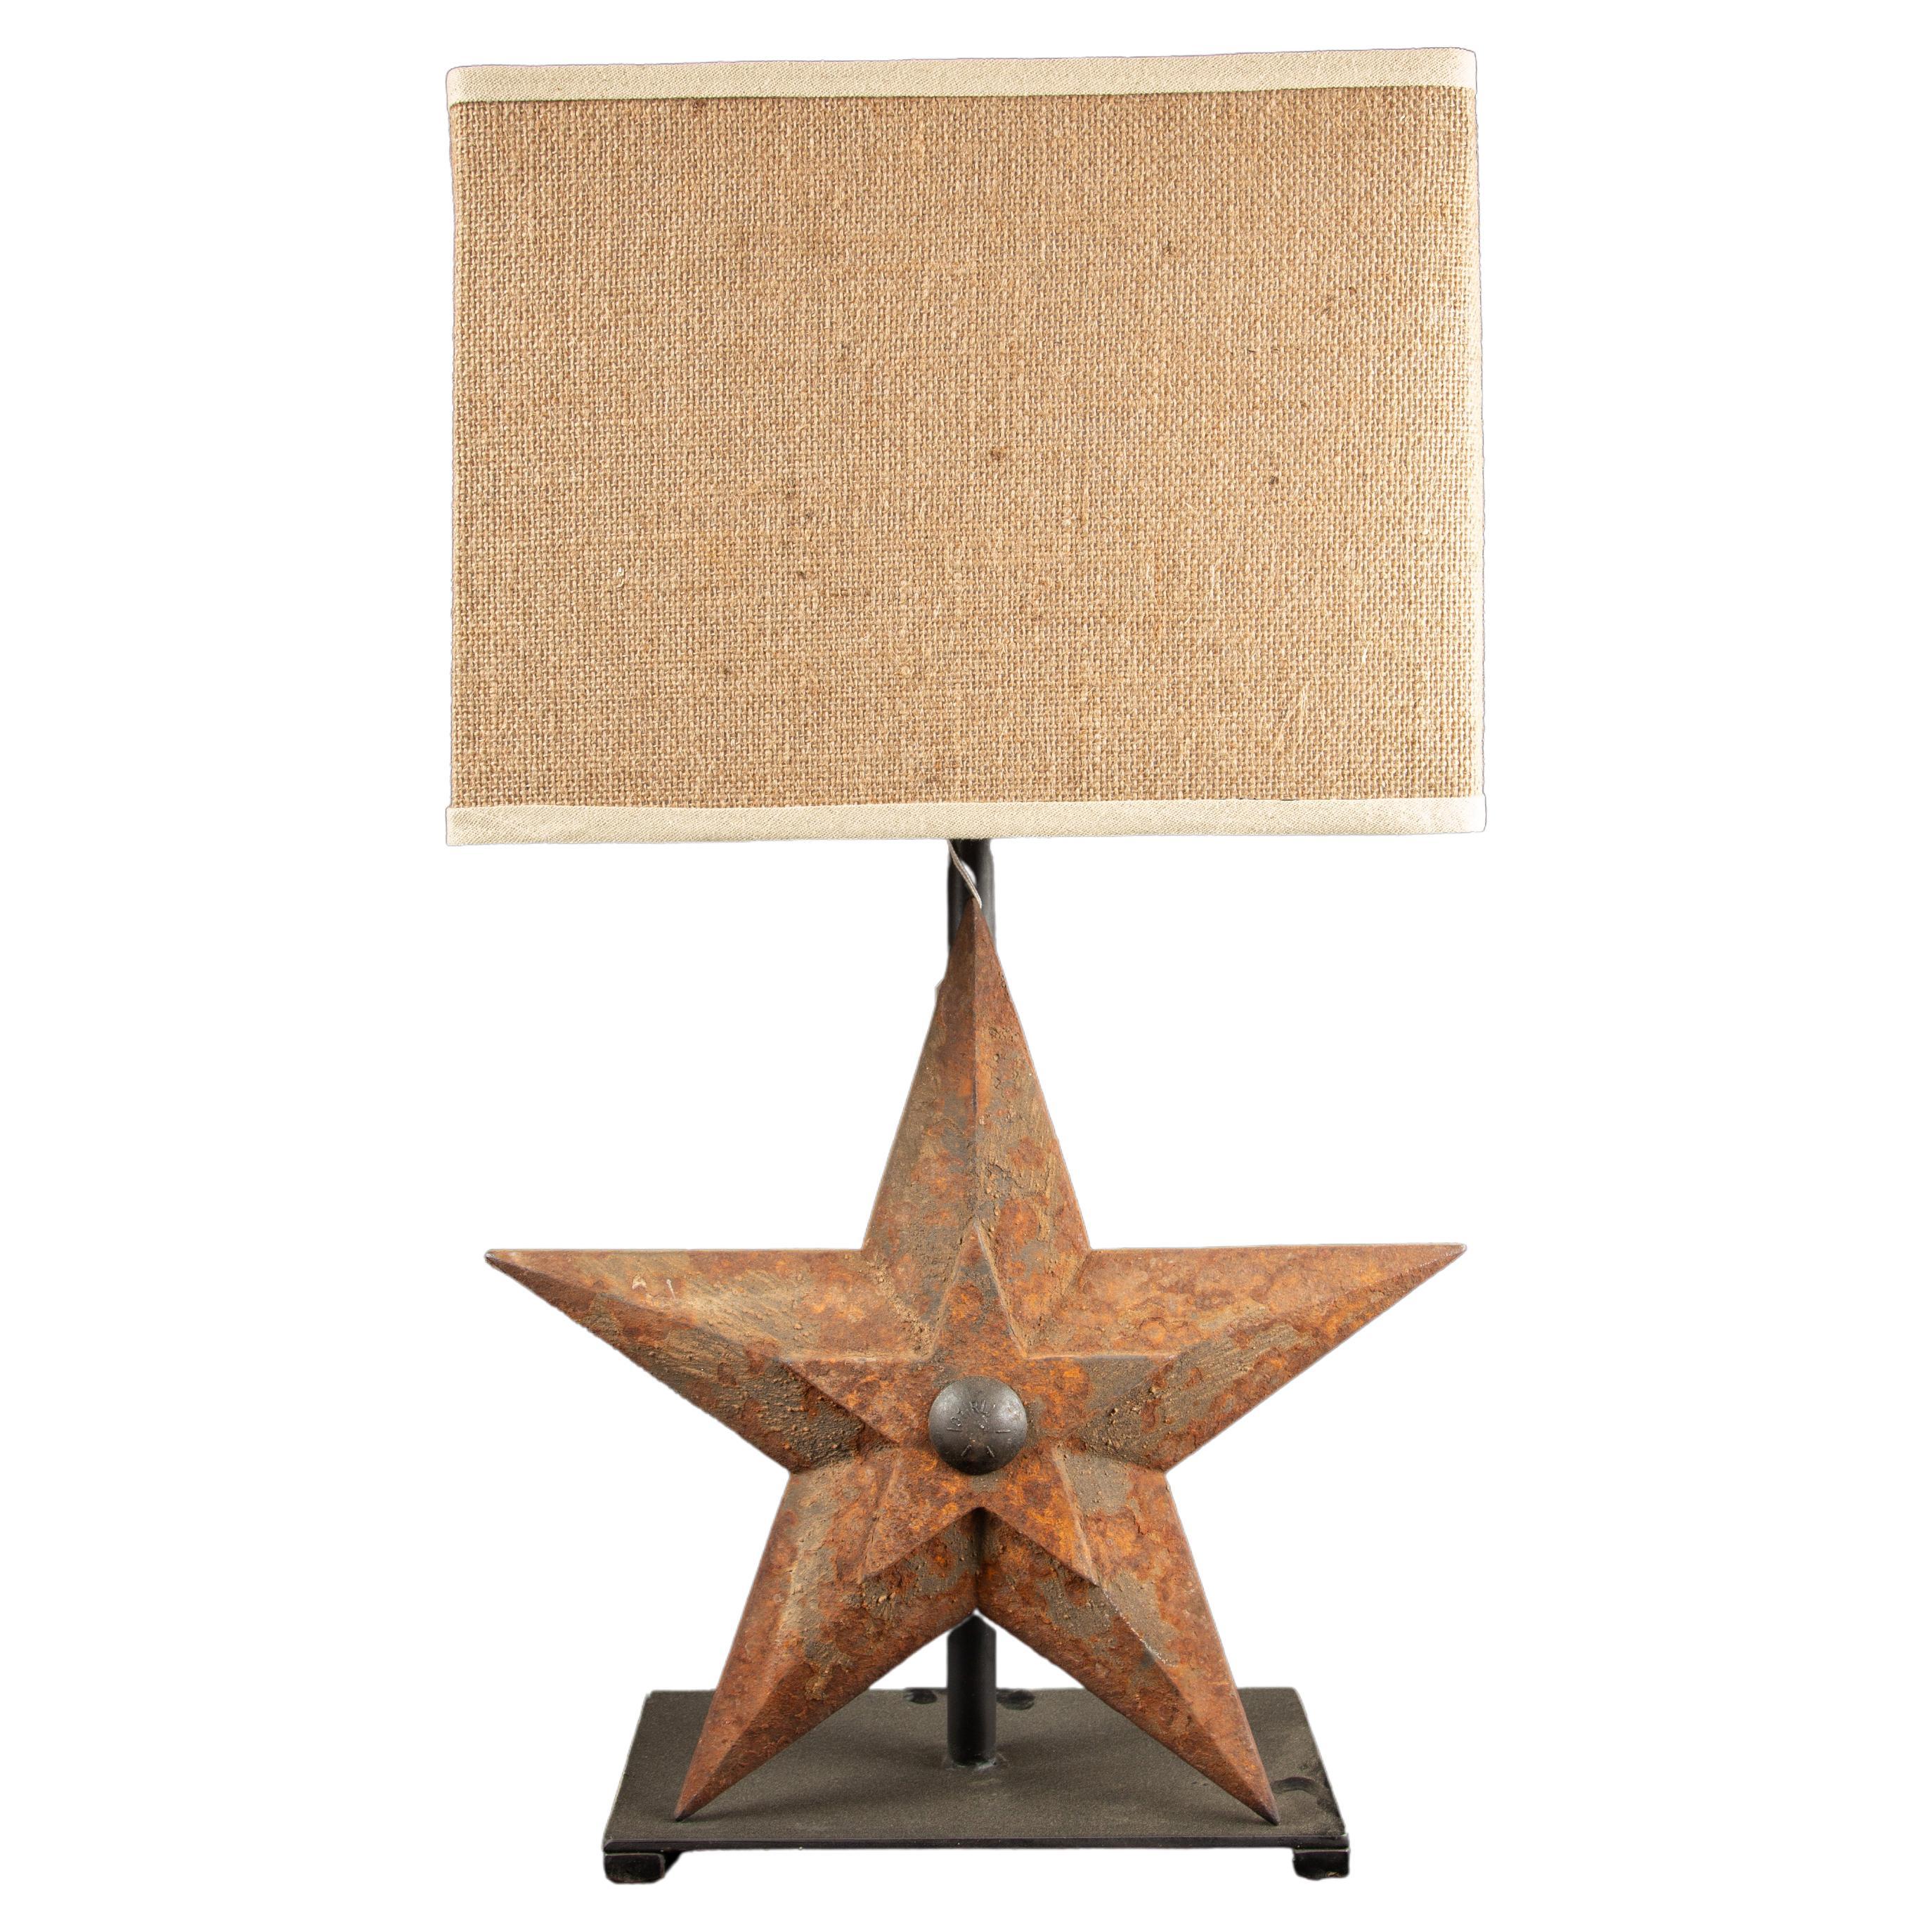 Cast Iron Star Lamp- Repurposed Architectural Element For Sale